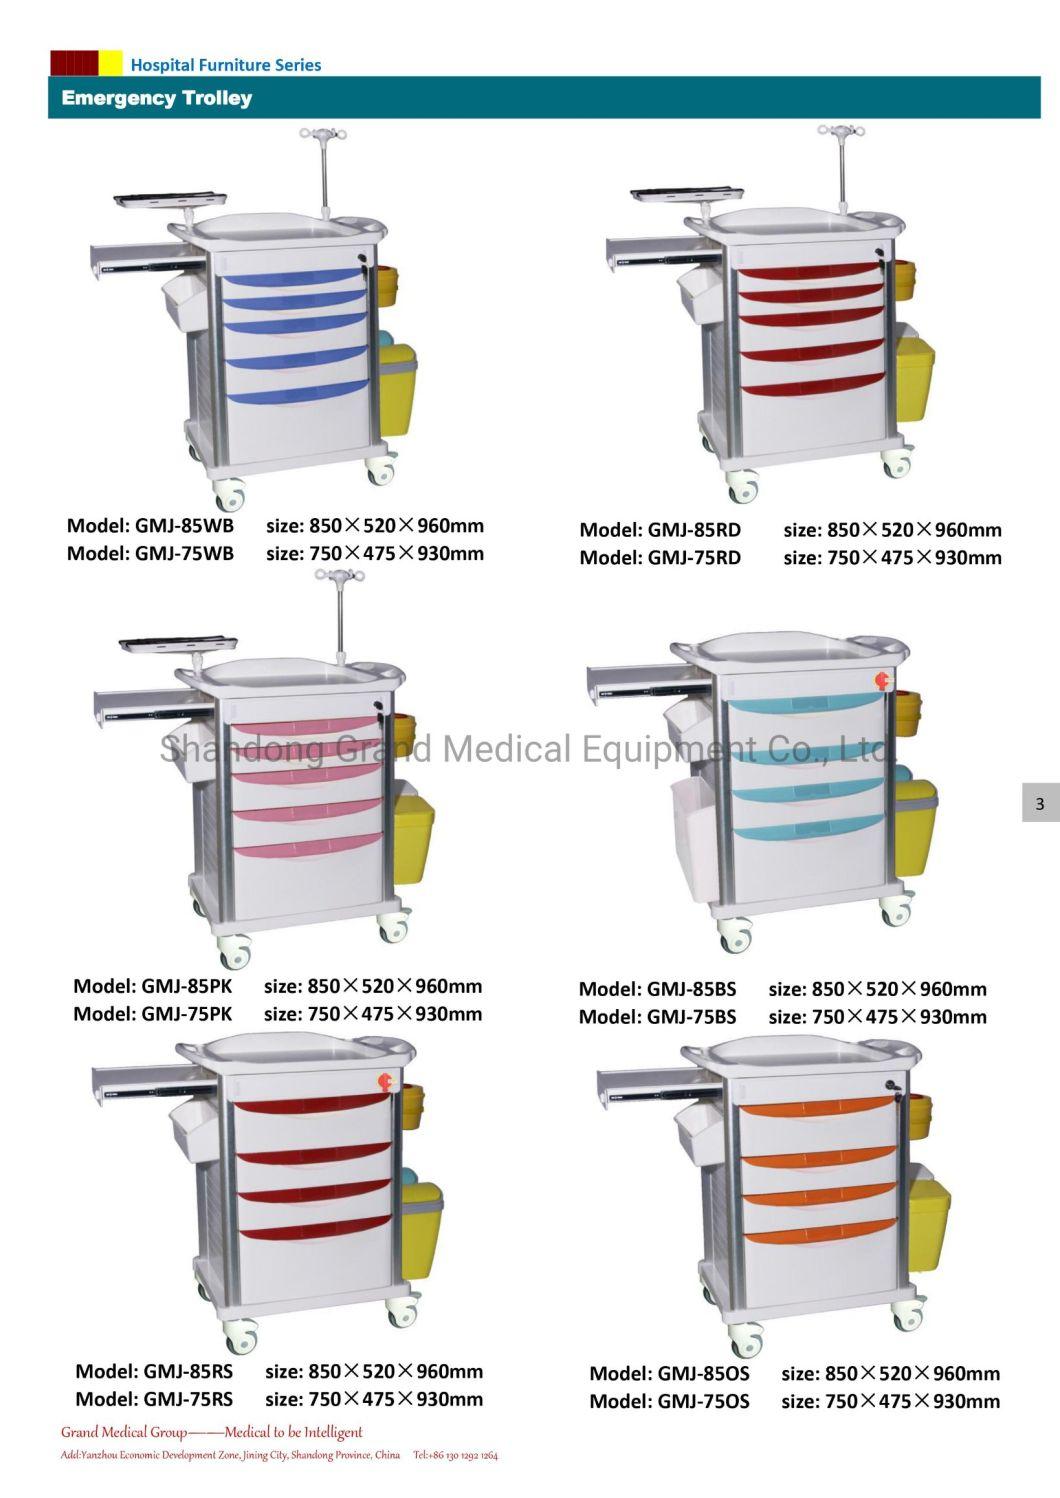 Buy China Modern Design Mobile Medical Trolley in Stock Medical Emergency Hospital Cart ABS Material with Casters Hospital Furniture